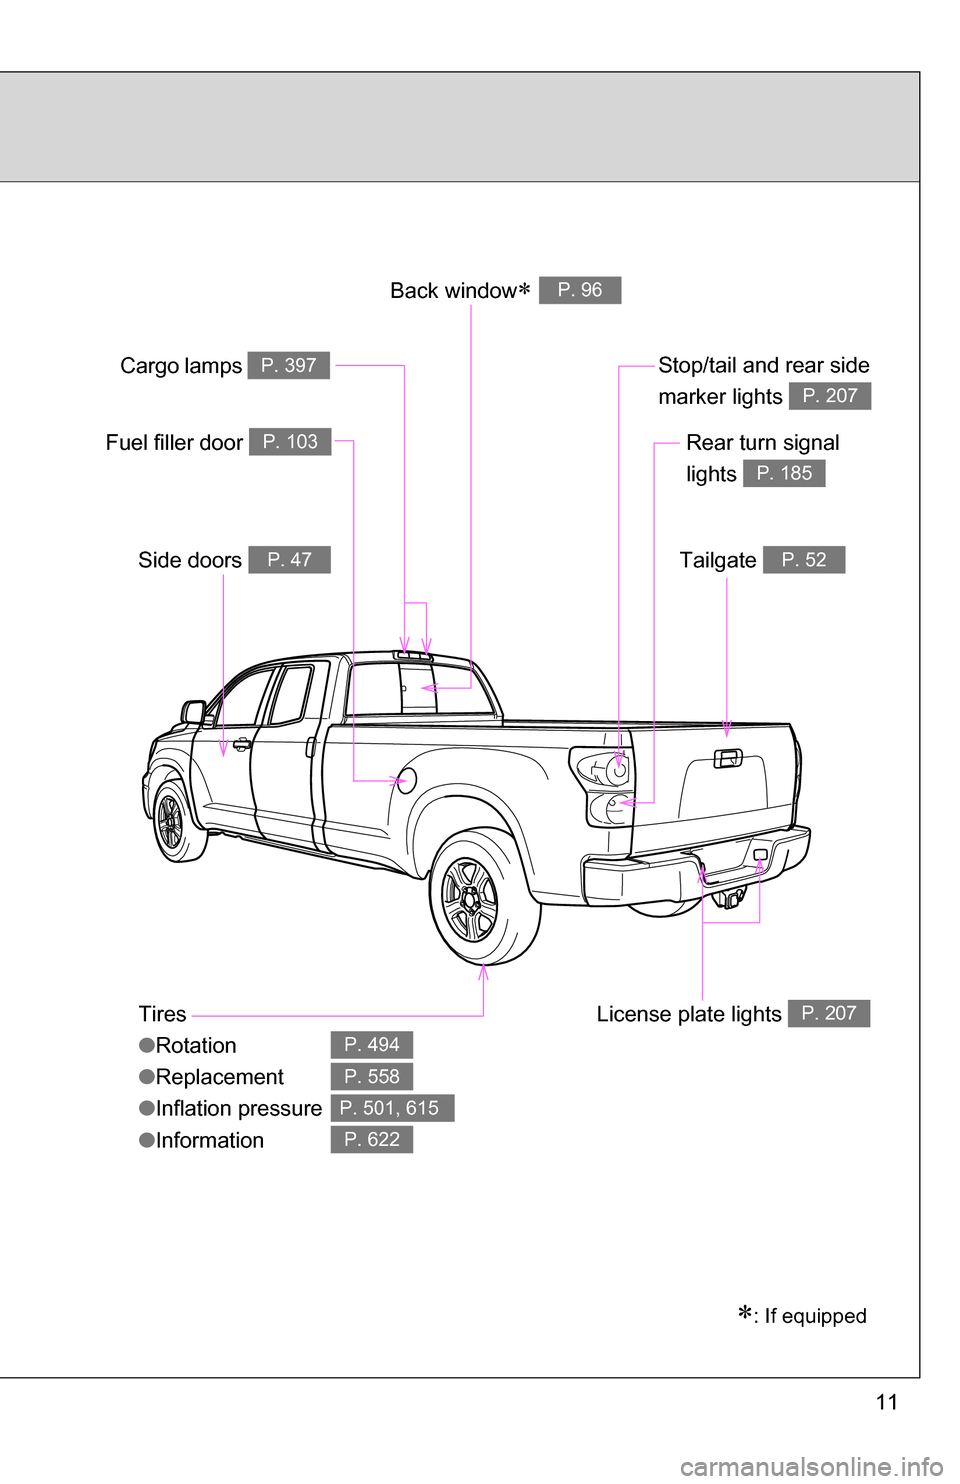 TOYOTA TUNDRA 2009 2.G Owners Manual 11
Tires
●Rotation
● Replacement
● Inflation pressure
● Information
P. 494
P. 558
P. 501, 615
P. 622
Fuel filler door P. 103
Back windowP. 96
Side doors P. 47
: If equipped
Tailgate P